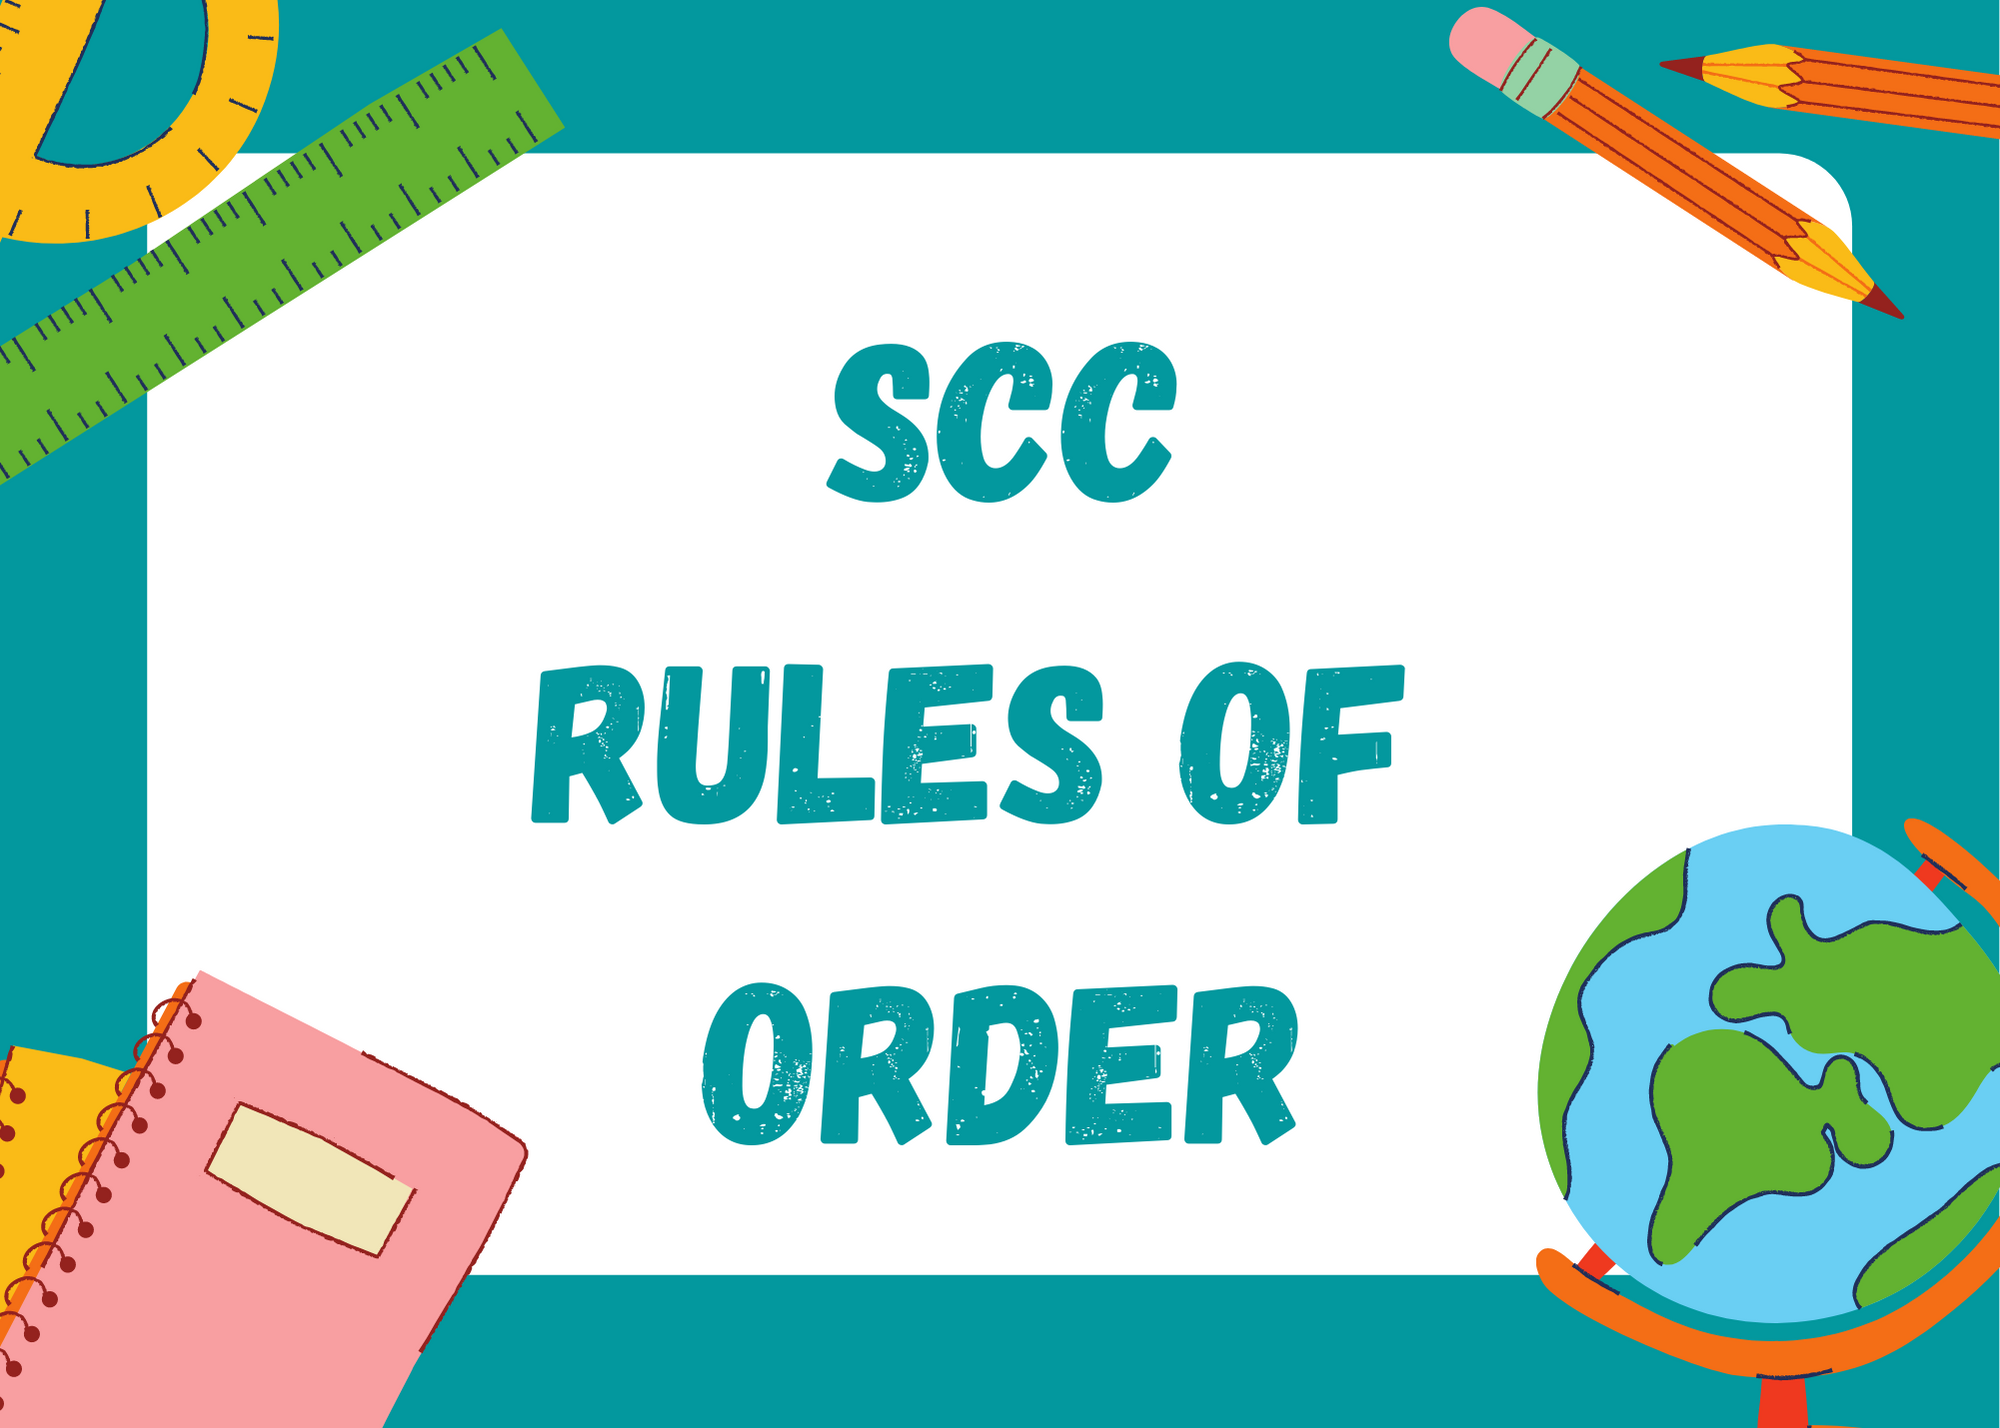 School Community Council Rules of Order